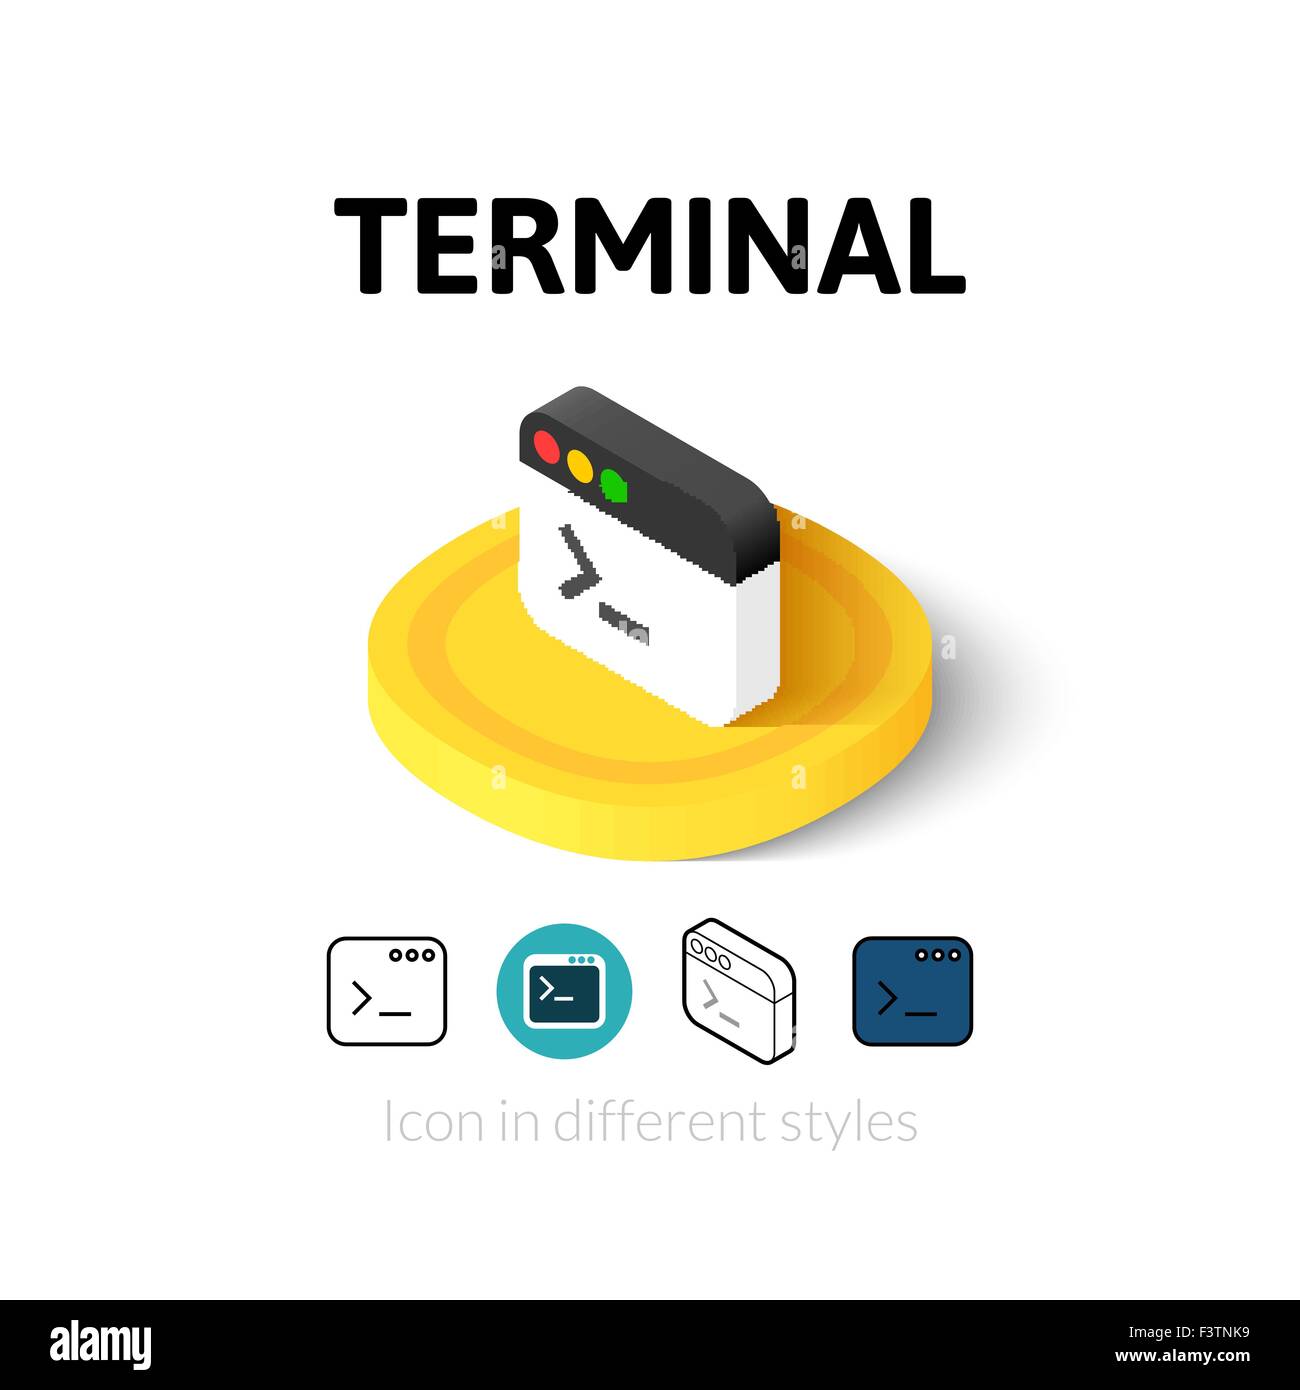 Terminal icon in different style Stock Vector